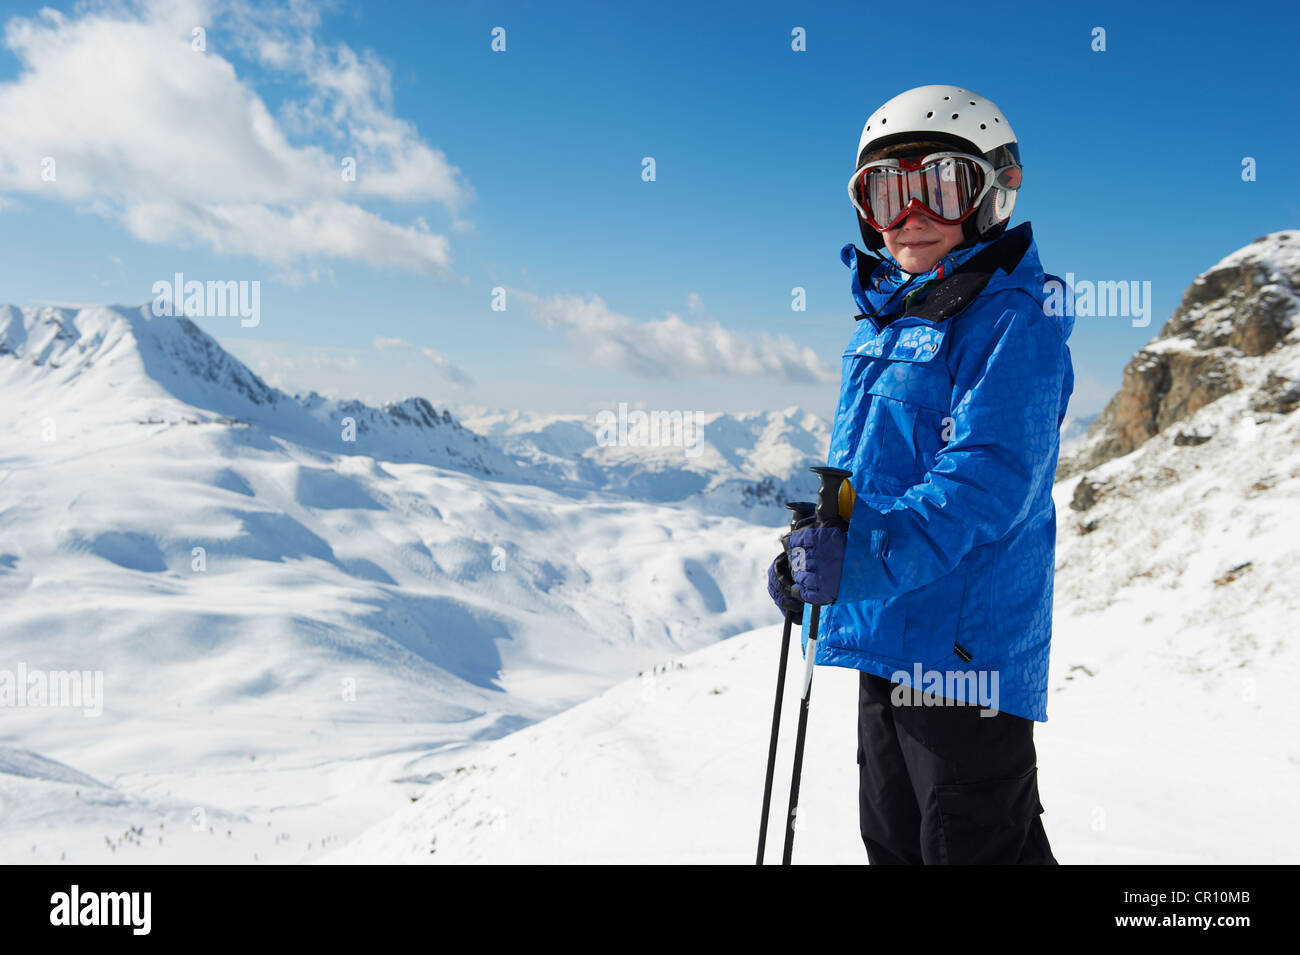 Boy in skis on snowy mountaintop Stock Photo